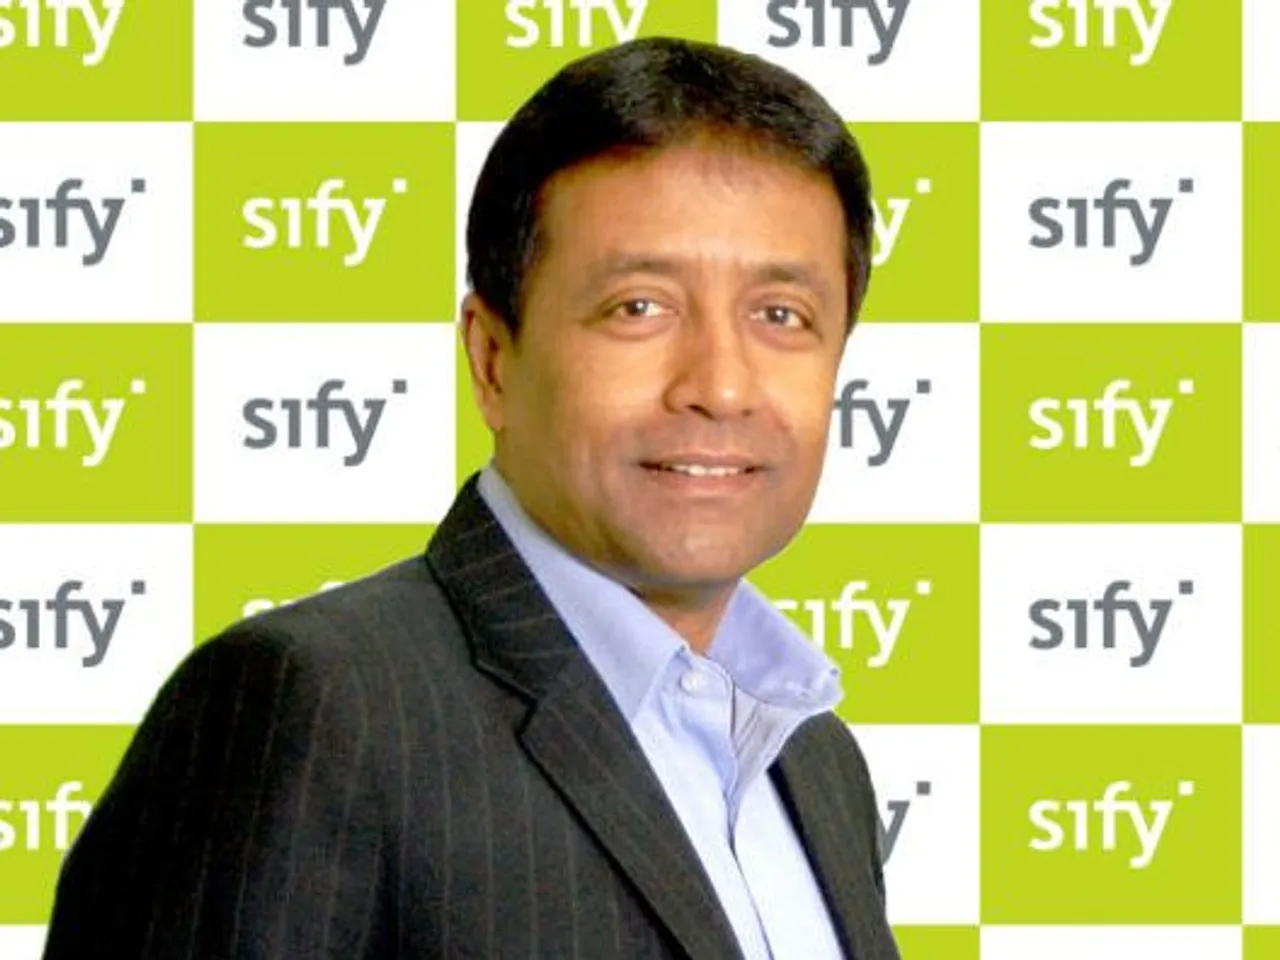 Sify Partners with Commvault to Provide Data Protection Across Multi-Cloud Environments